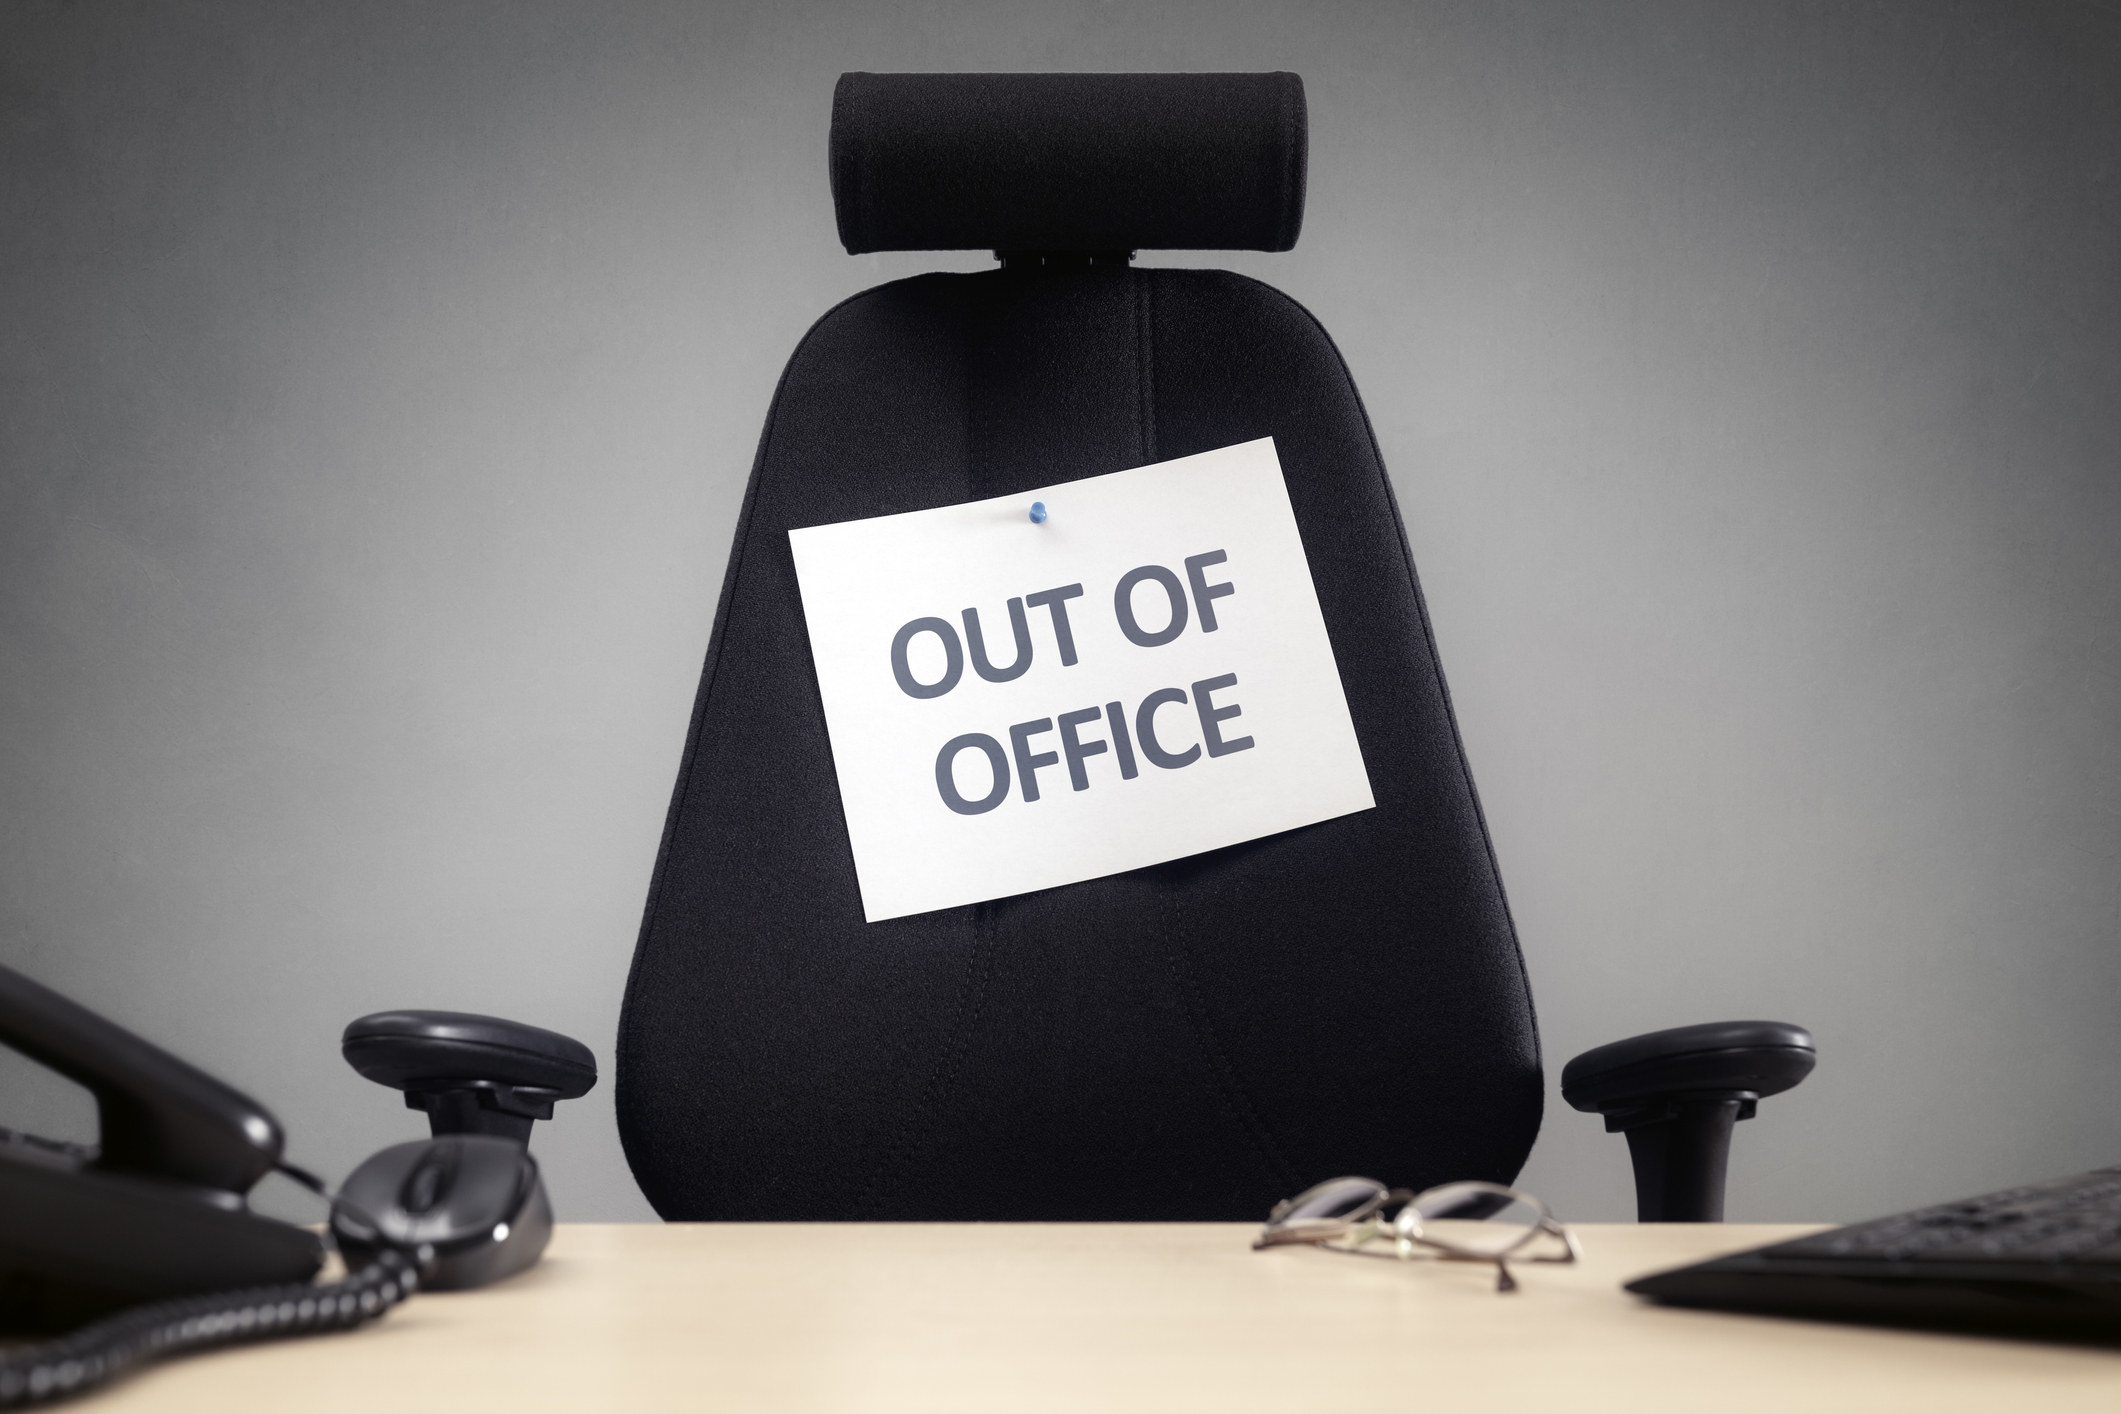 An &quot;Out of office&quot; sign on a chair